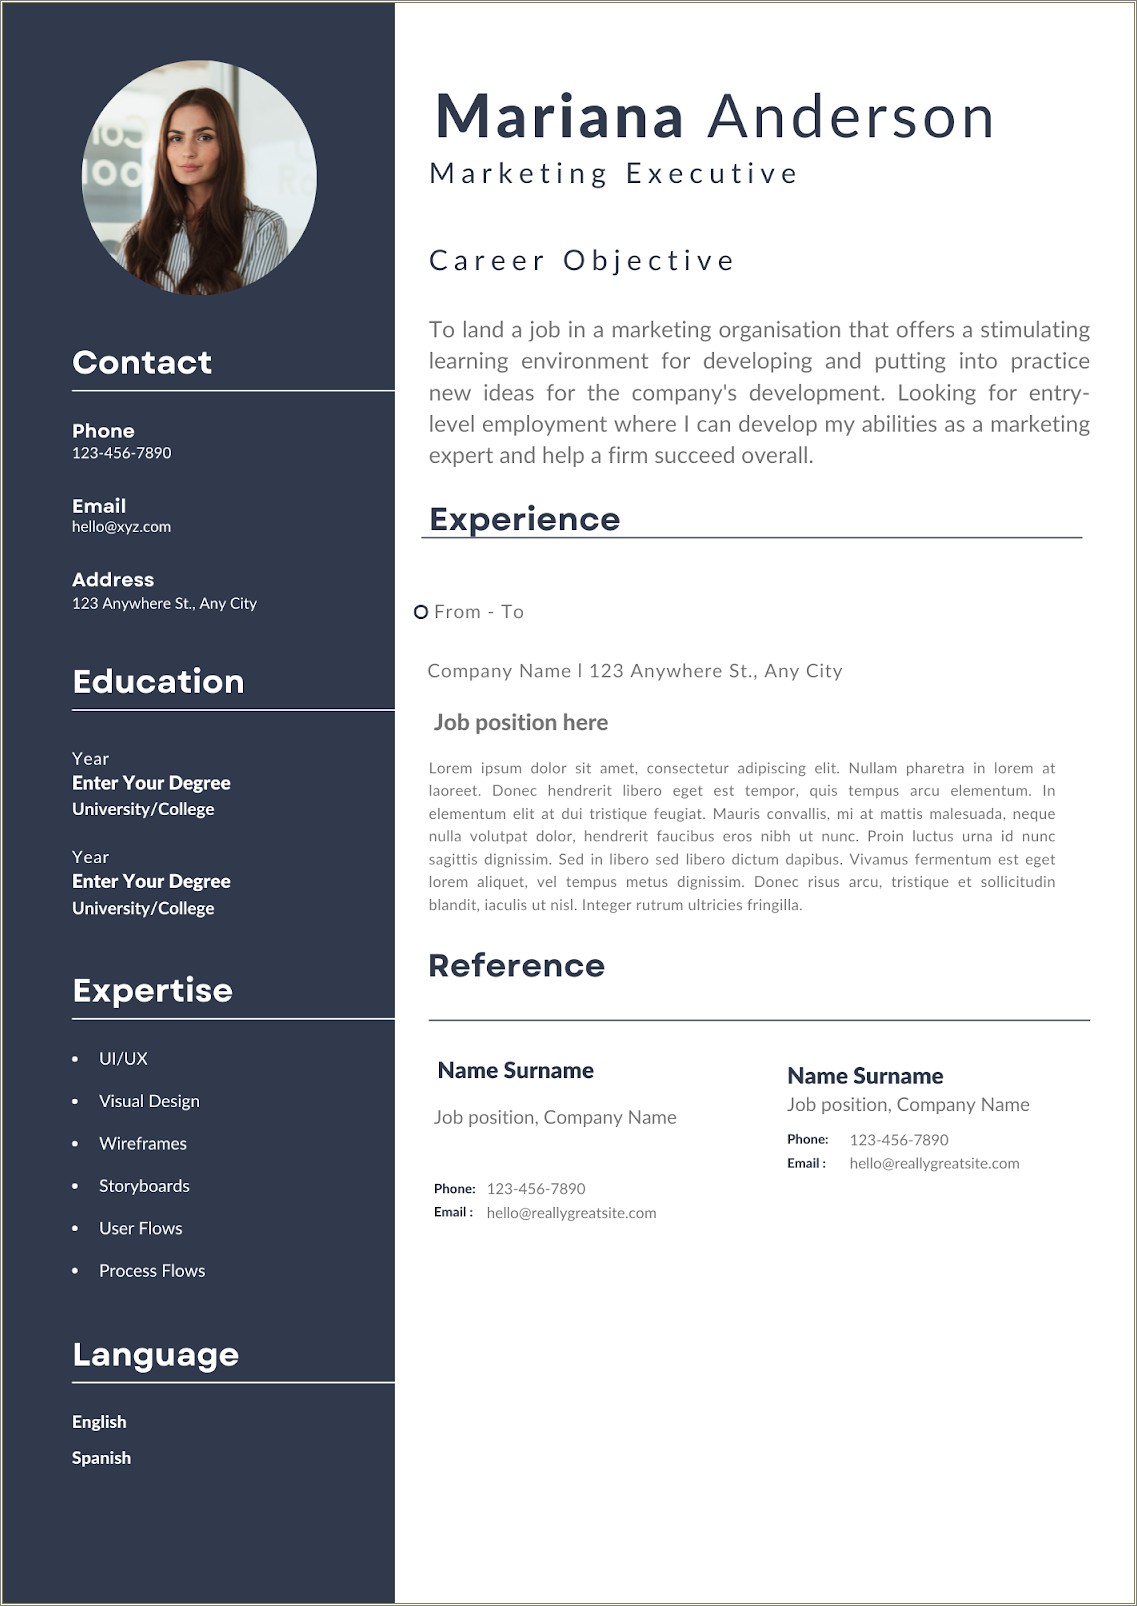 Example Of A Resume With An Objective Statement